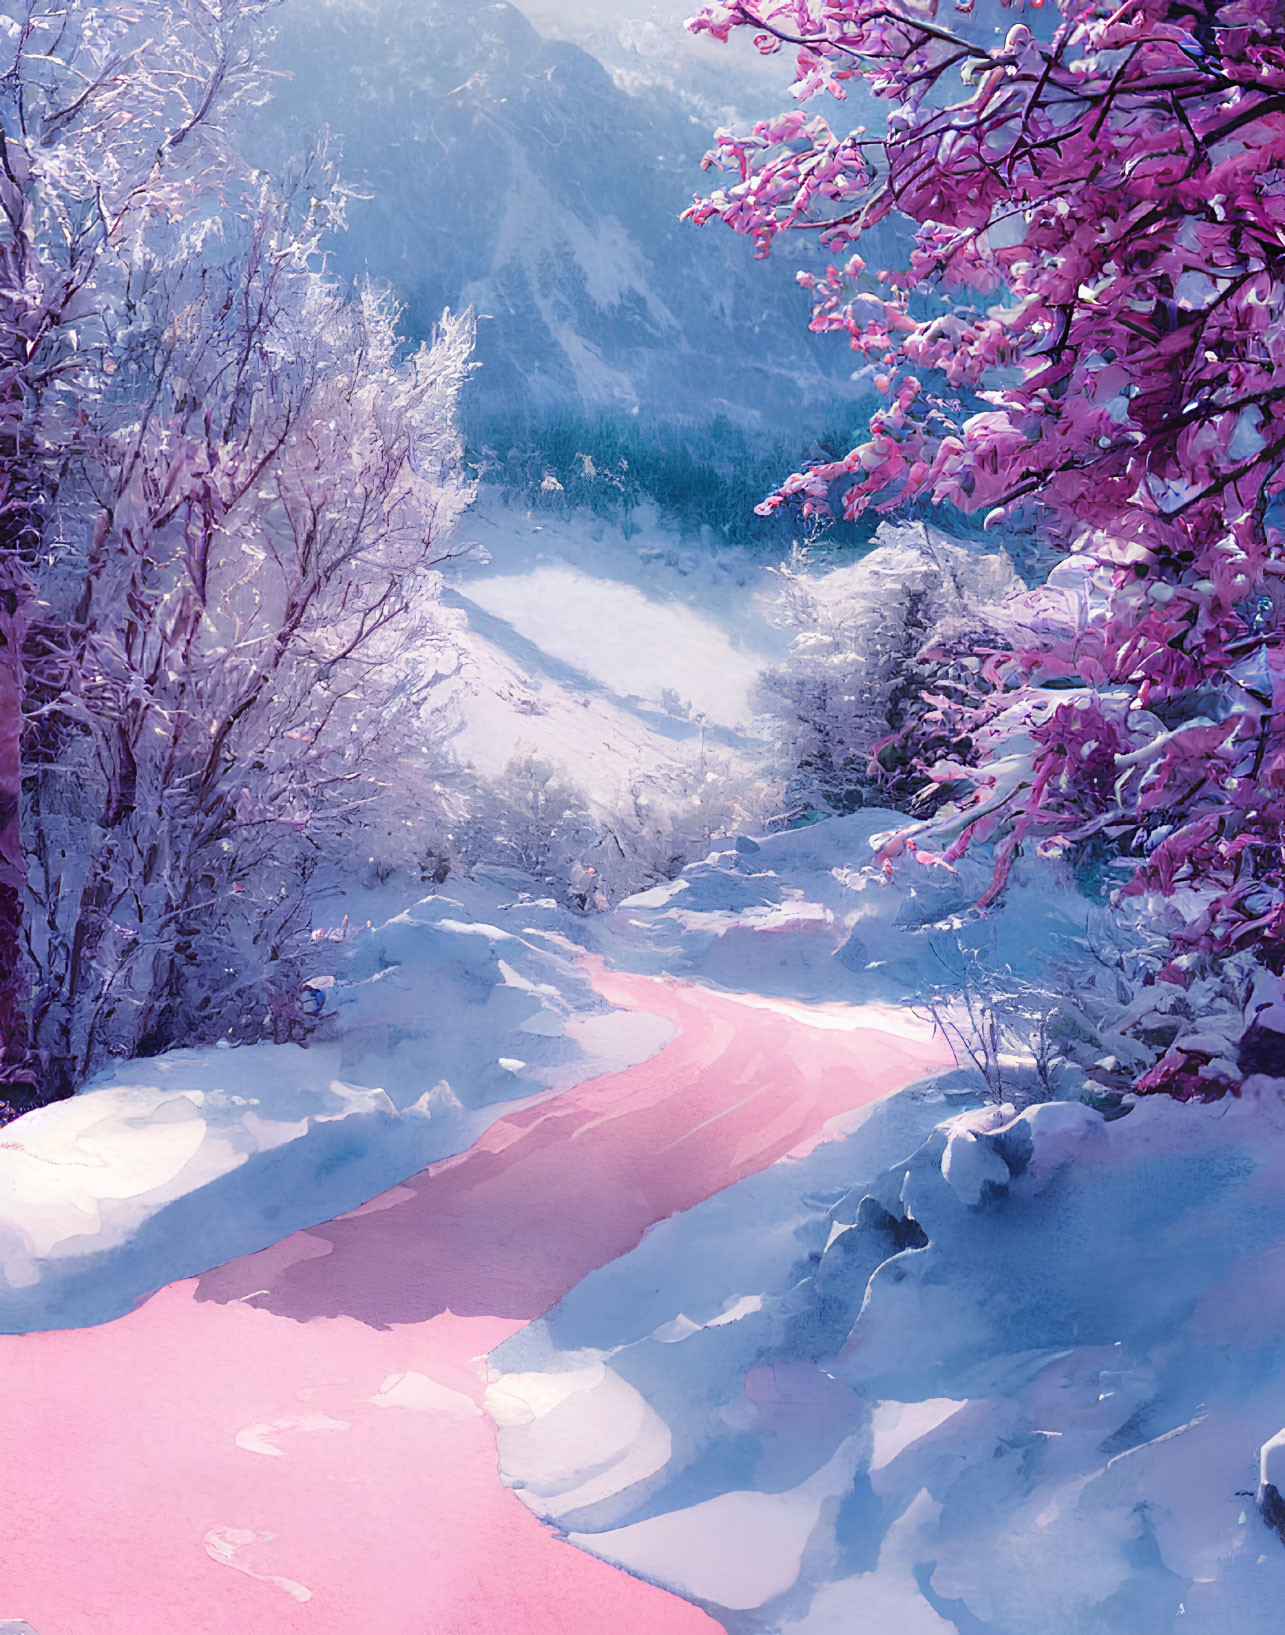 Snowy landscape with pink path among frost-covered trees